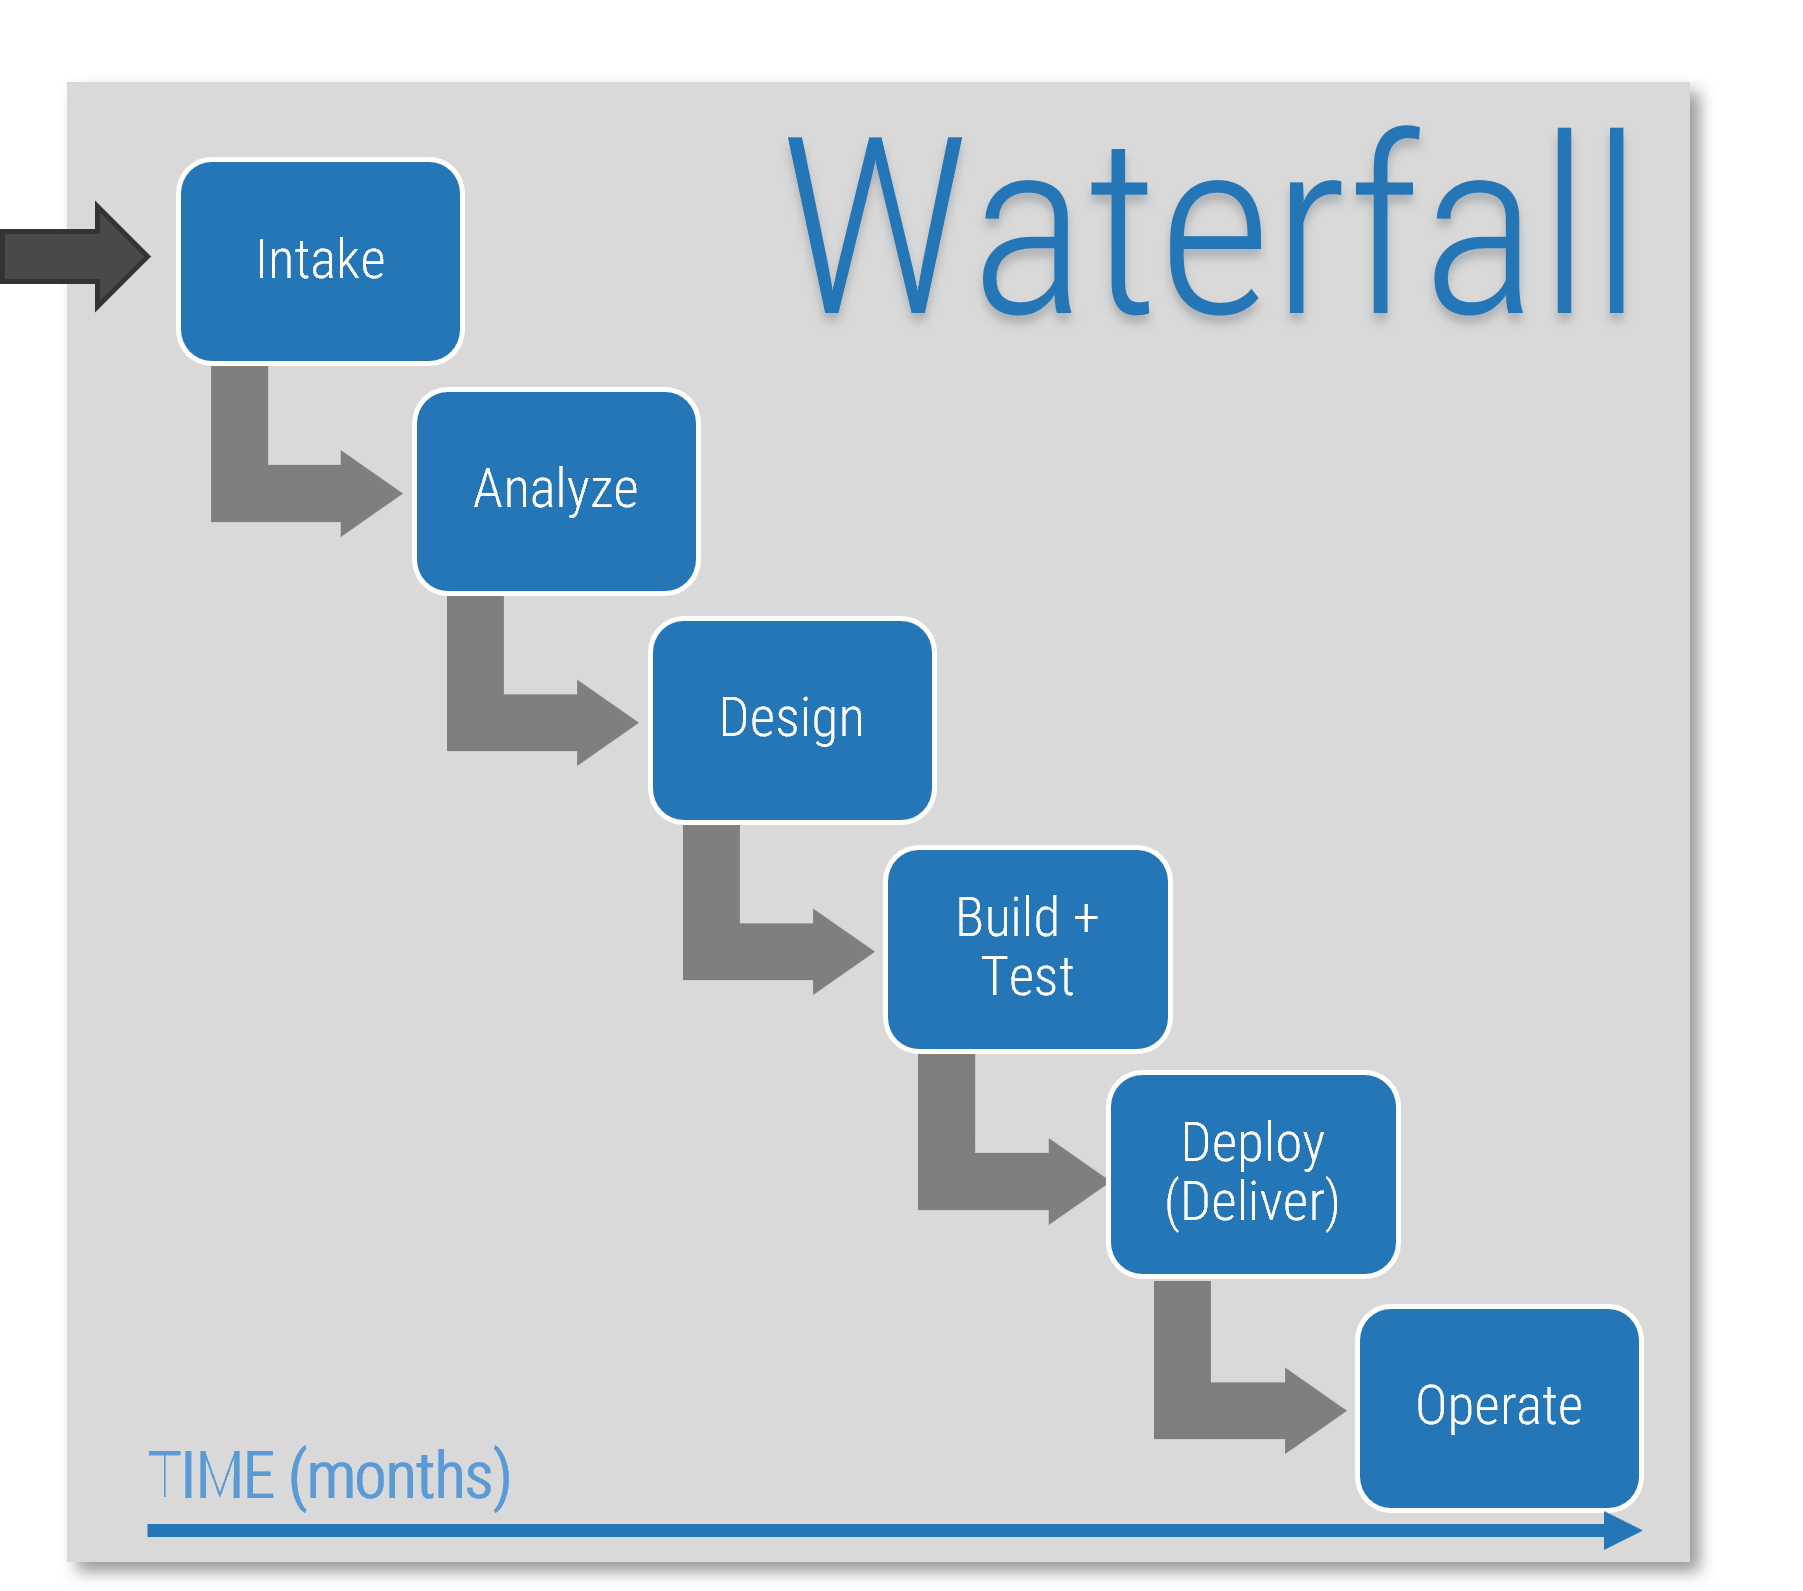 This is an example of the Waterfall Approach.